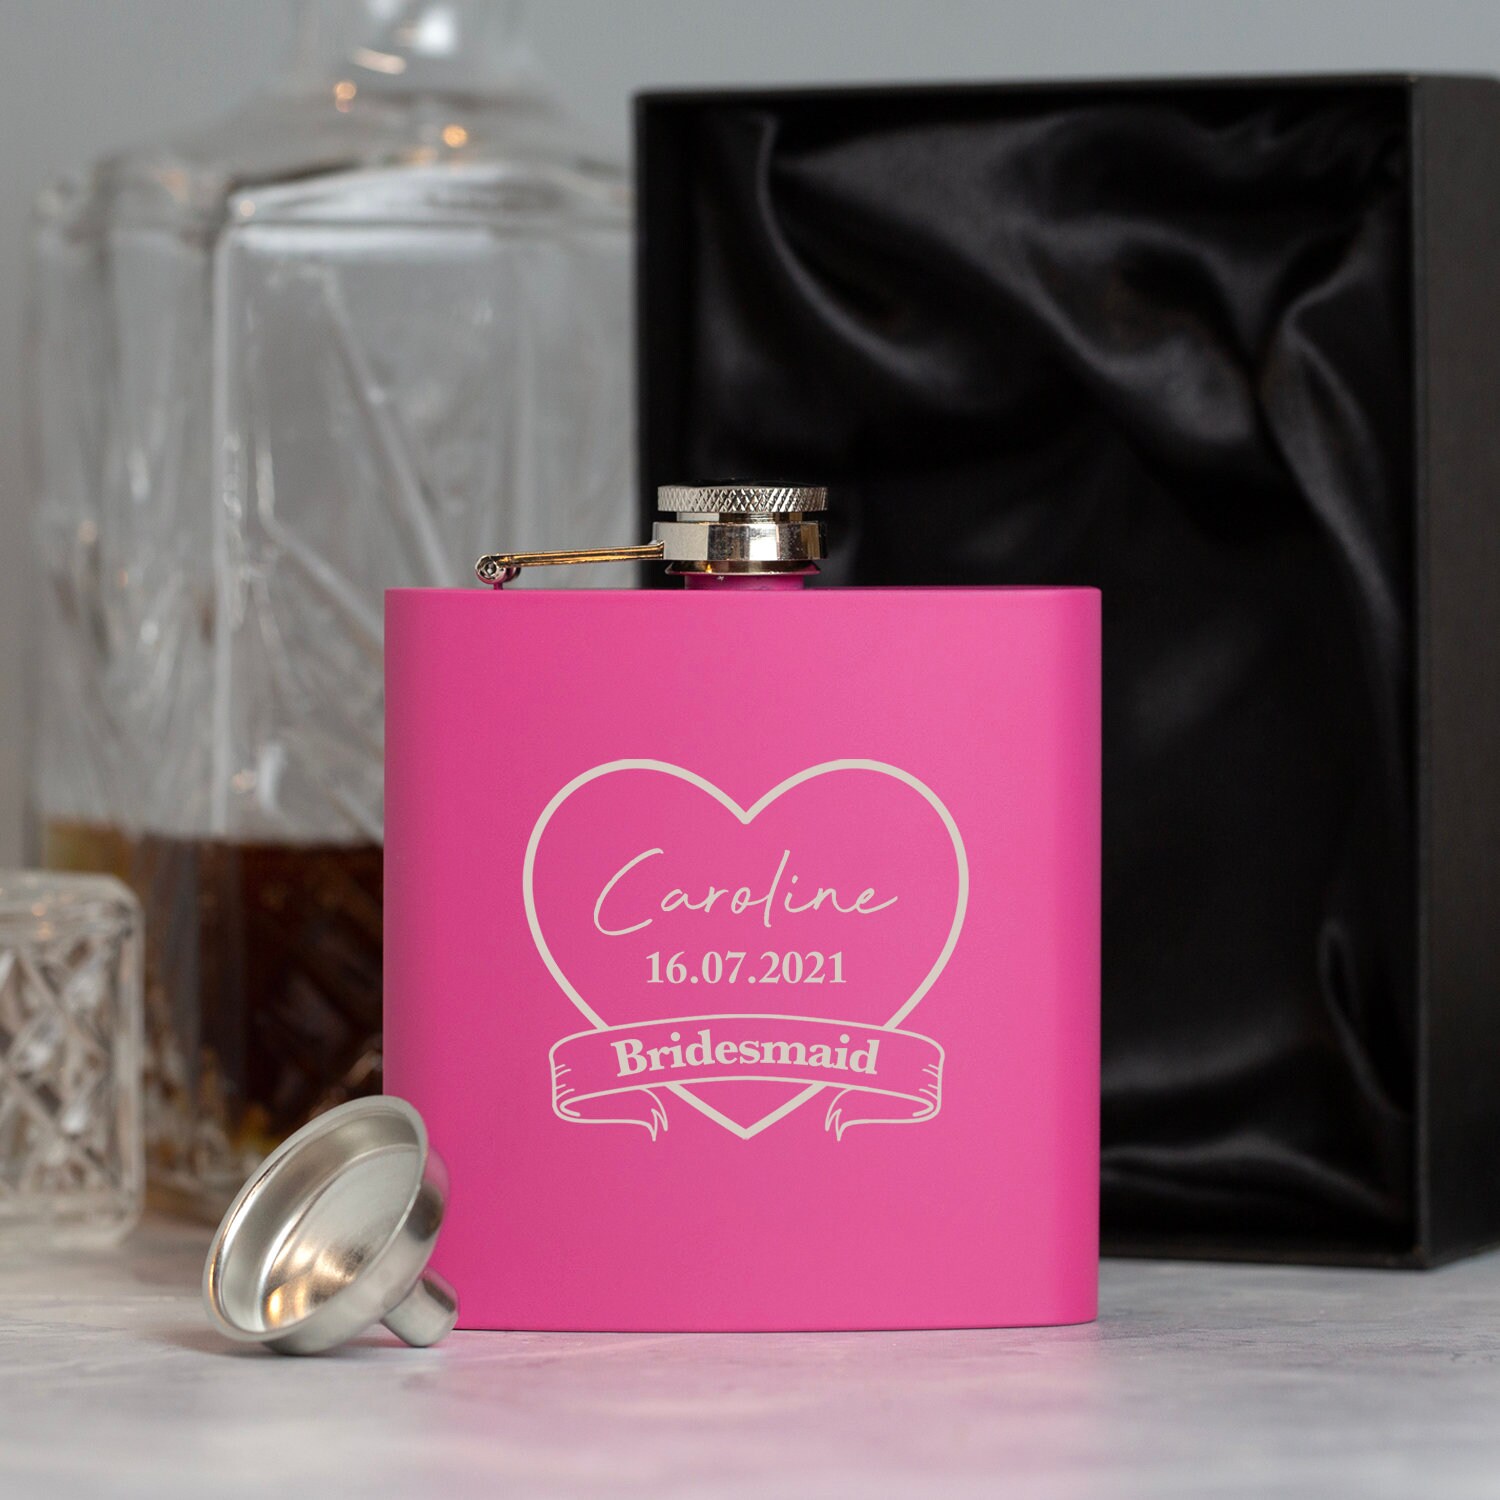 Personalised Engraved 6oz Pink Bridesmaid Hip Flasks Gifts Ideas For Wedding Favours Thank You Presents Tokens Personalized Ideal Womens